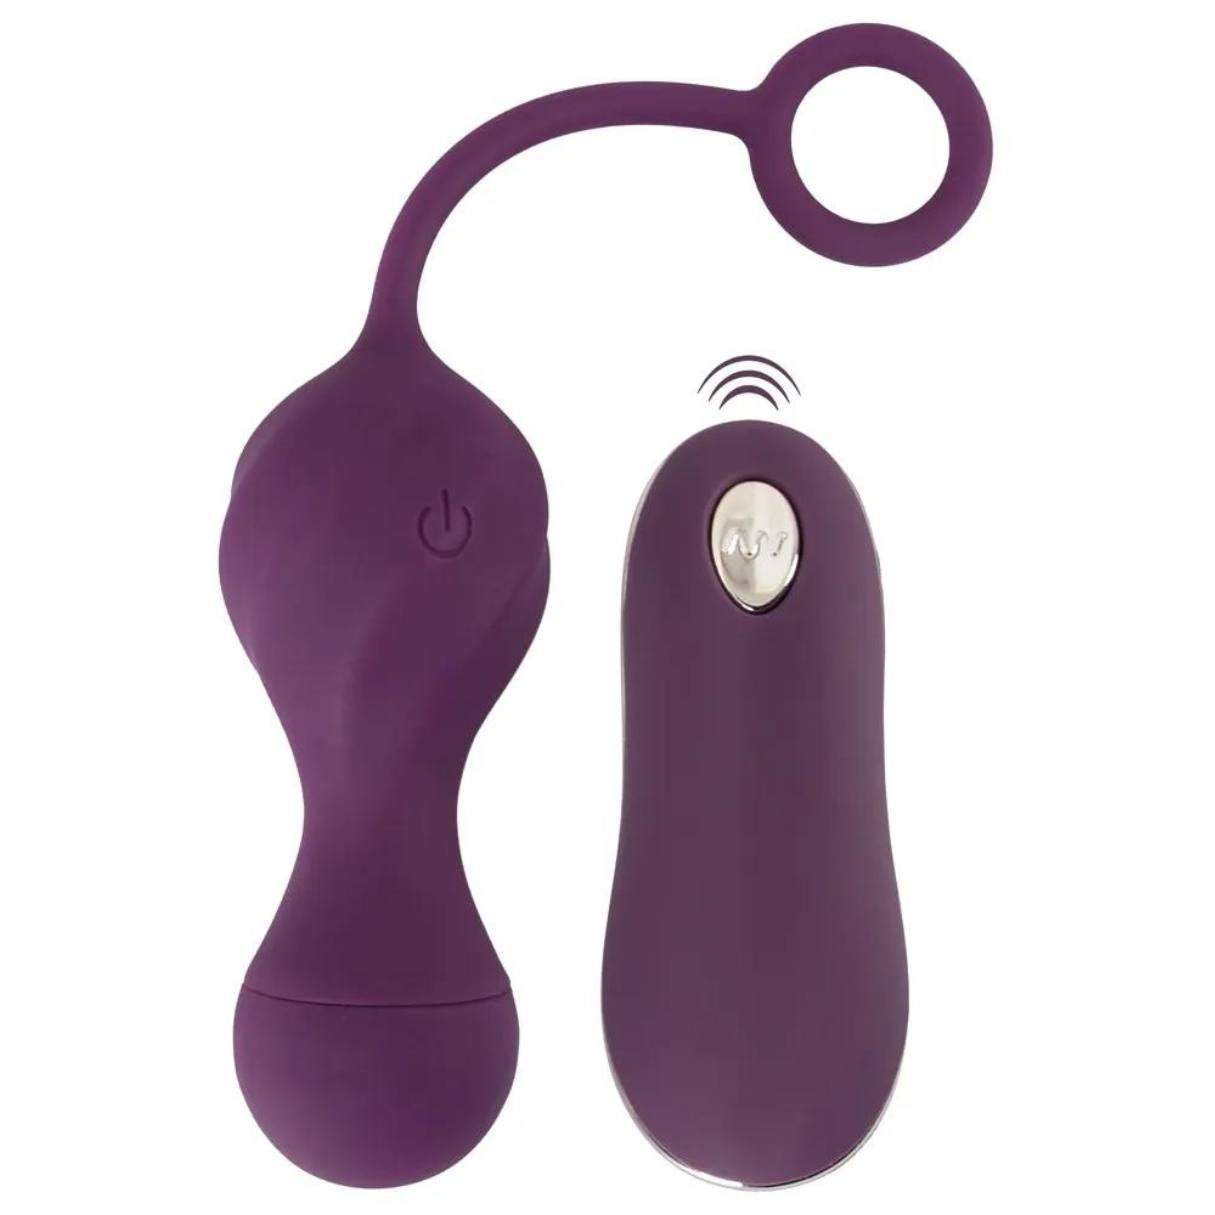 SWEET SMILE Love Balls Remote Controlled Vibrator